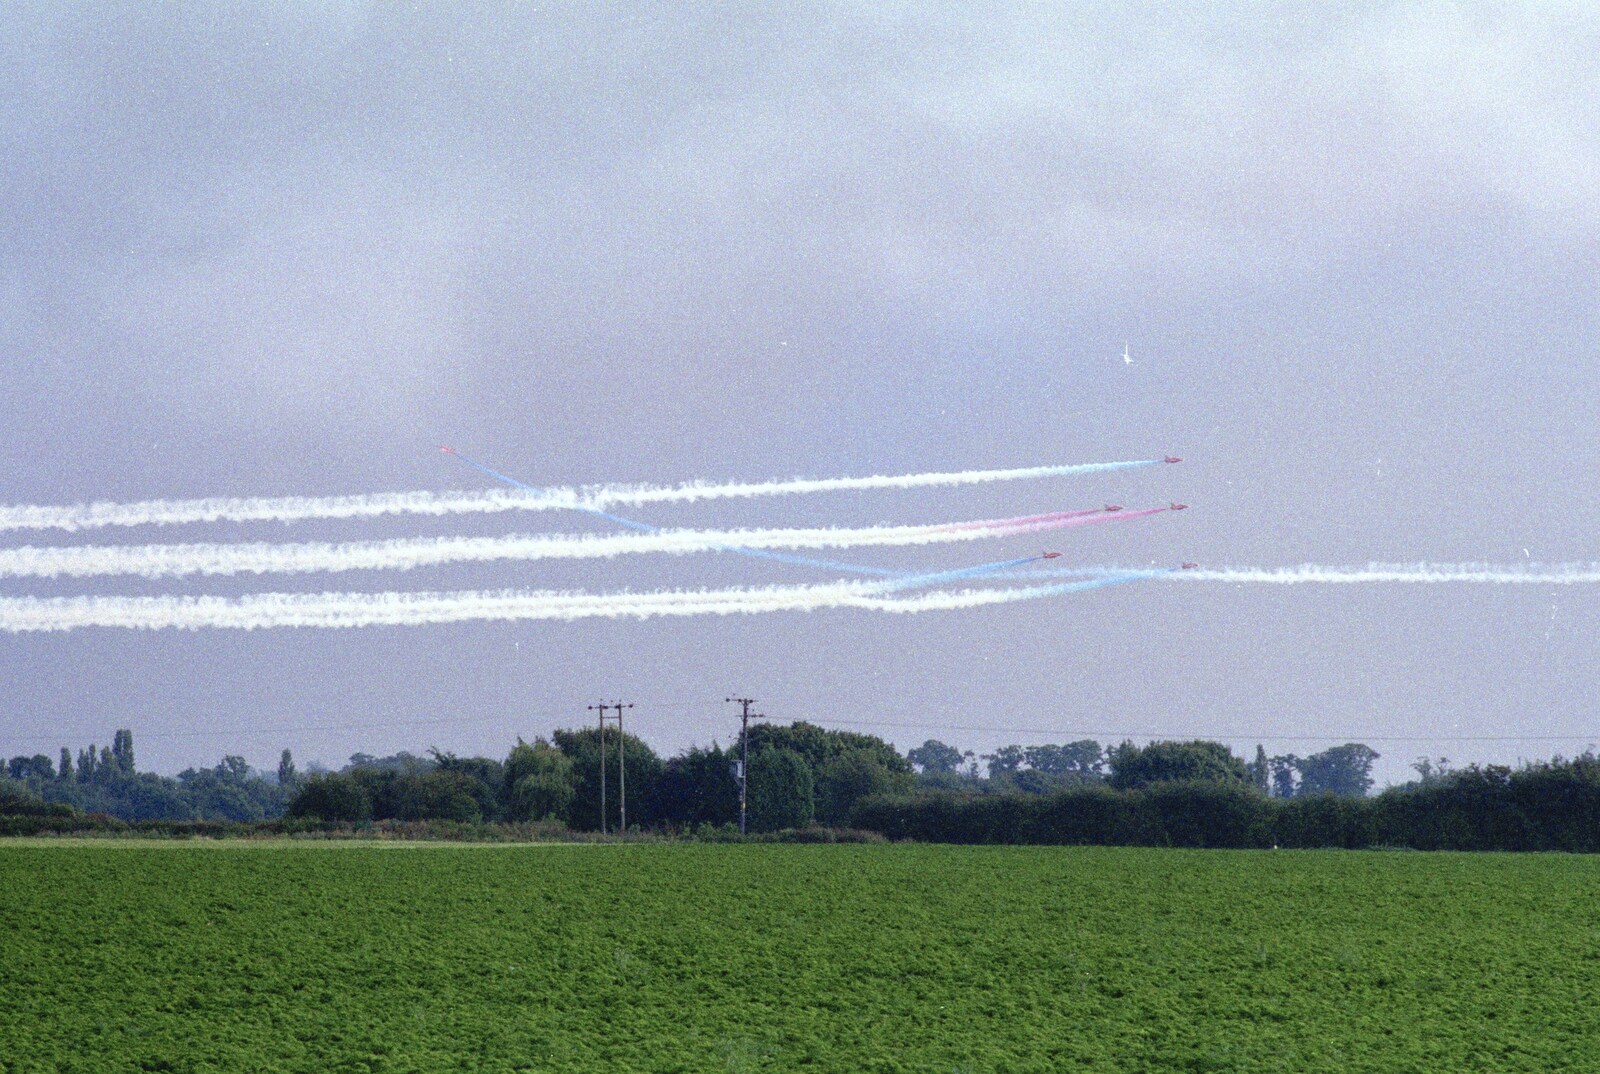 The Red Arrows, and Andrew's CISU Barbeque, Ipswich, Suffolk - 22nd July 2000: A Red Arrow cross-over